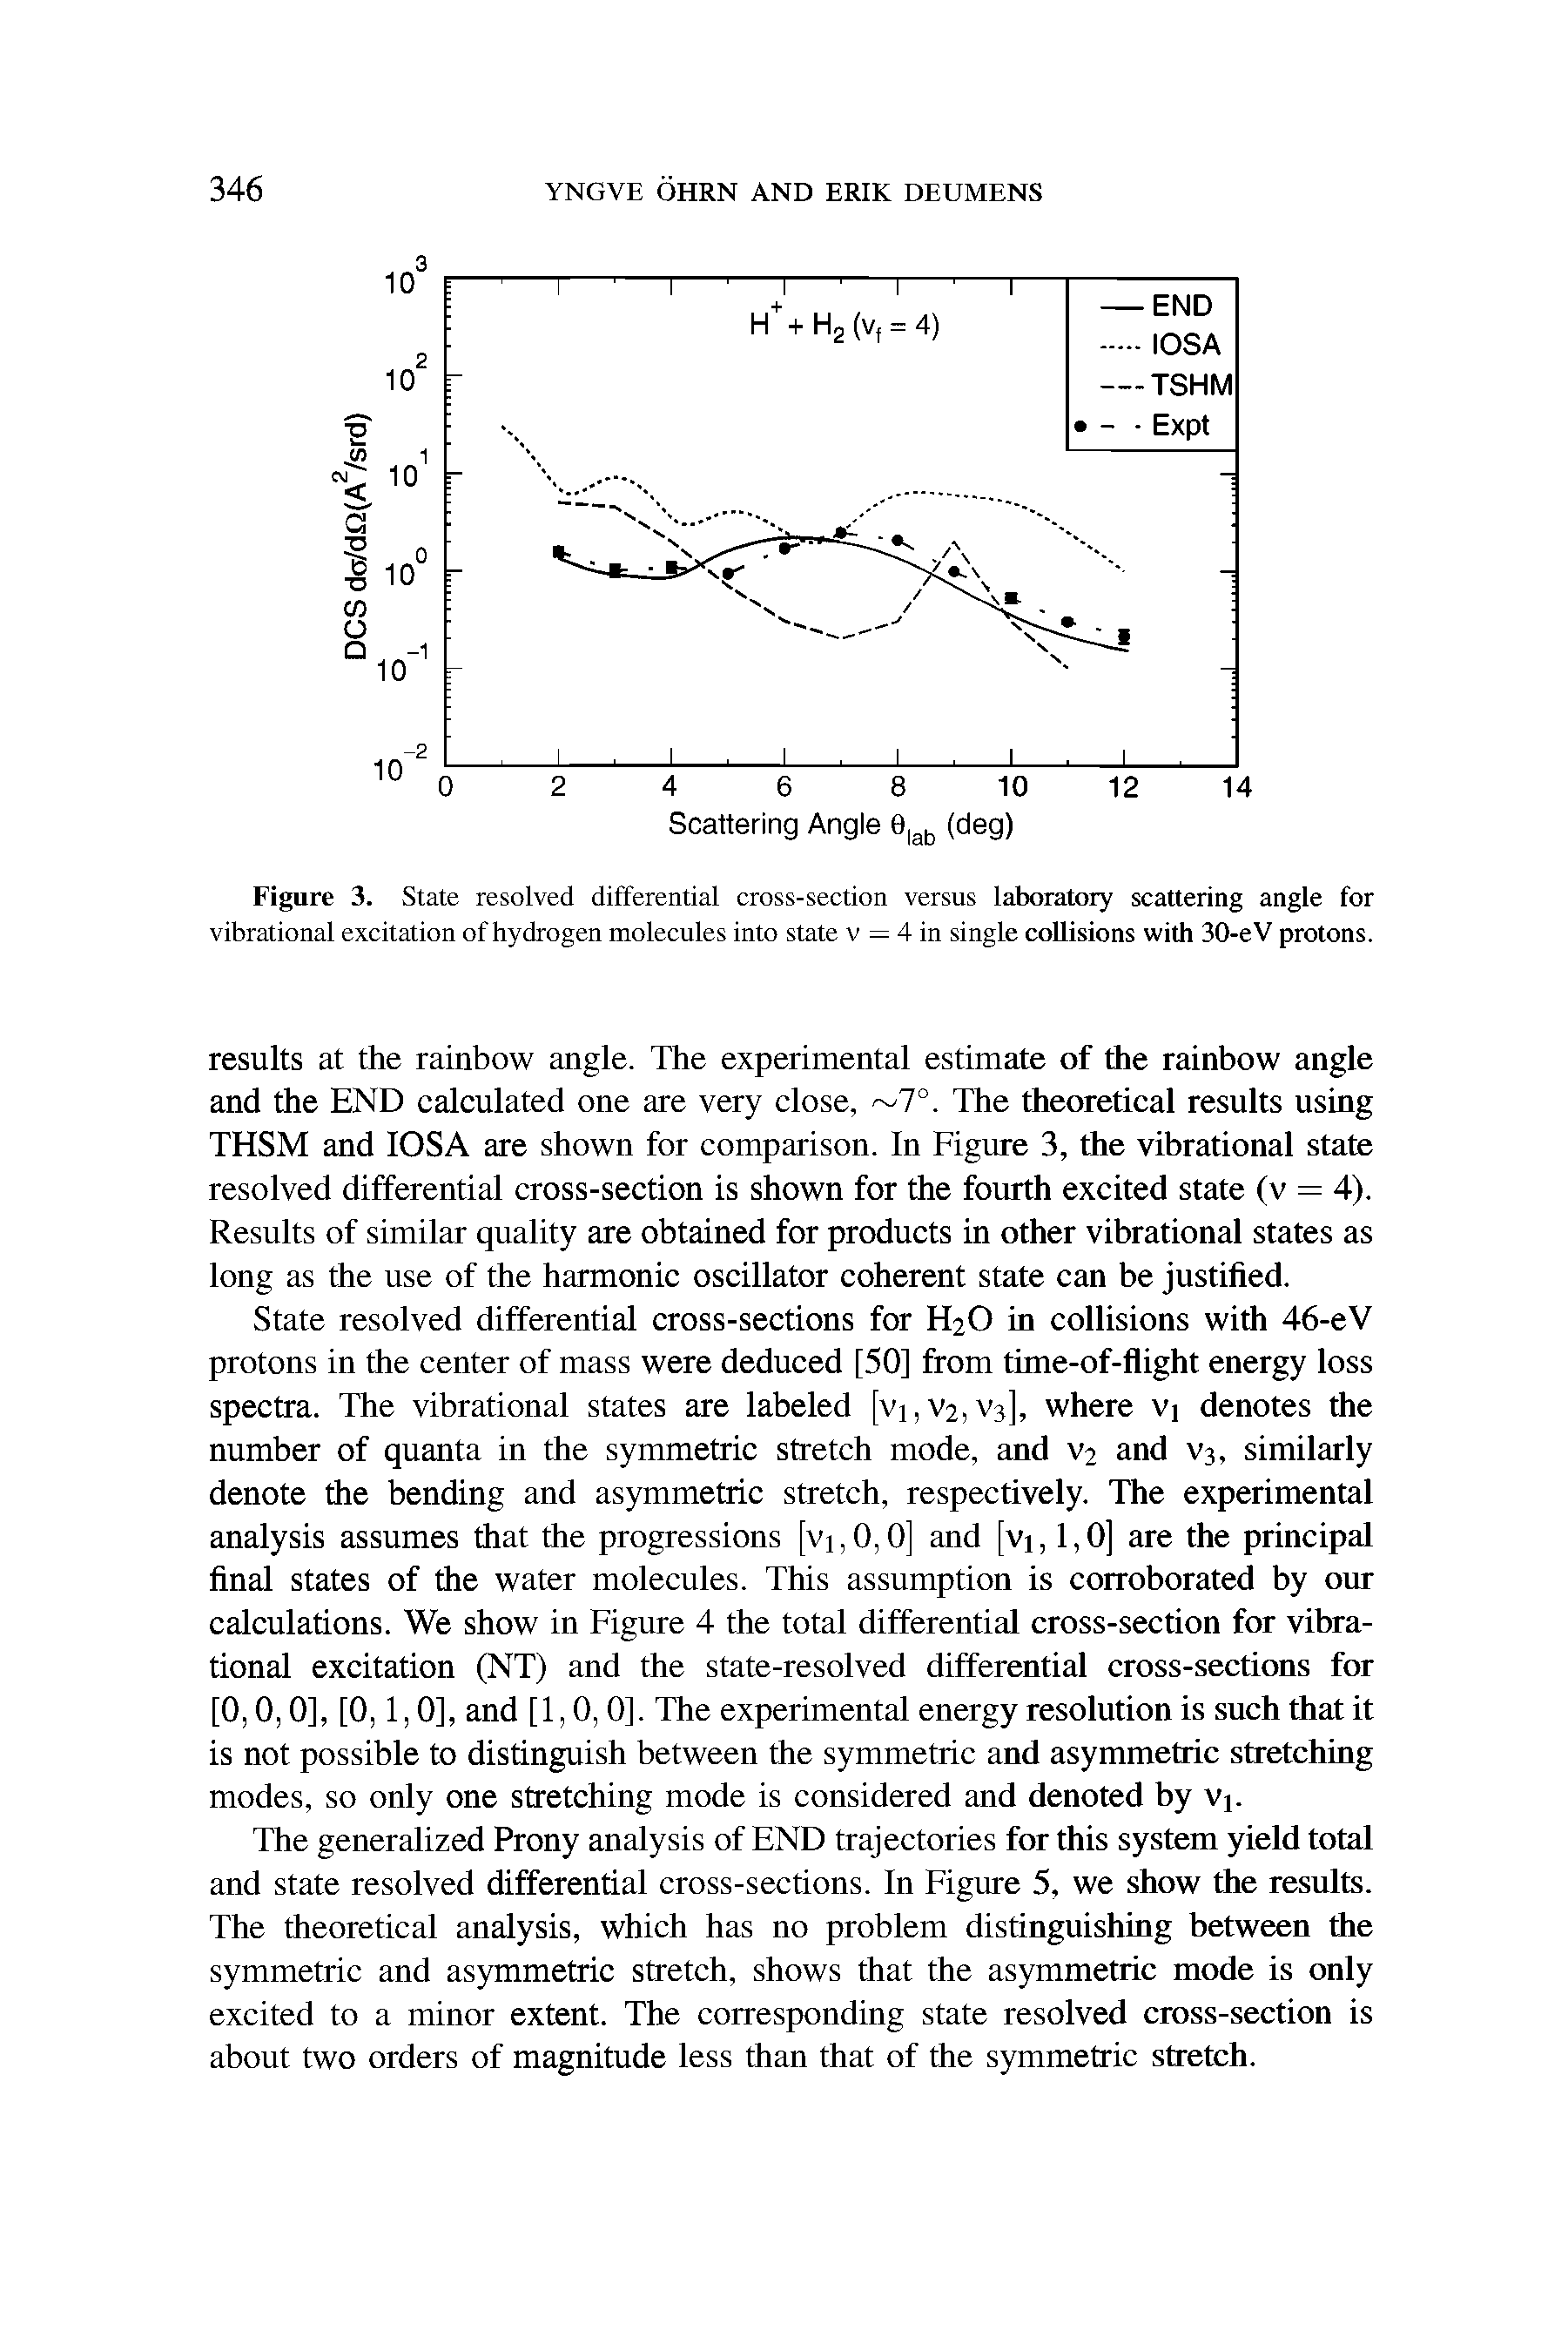 Figure 3. State resolved differential cross-section versus laboratory scattering angle for vibrational excitation of hydrogen molecules into state v = 4 in single collisions with 30-eV protons.